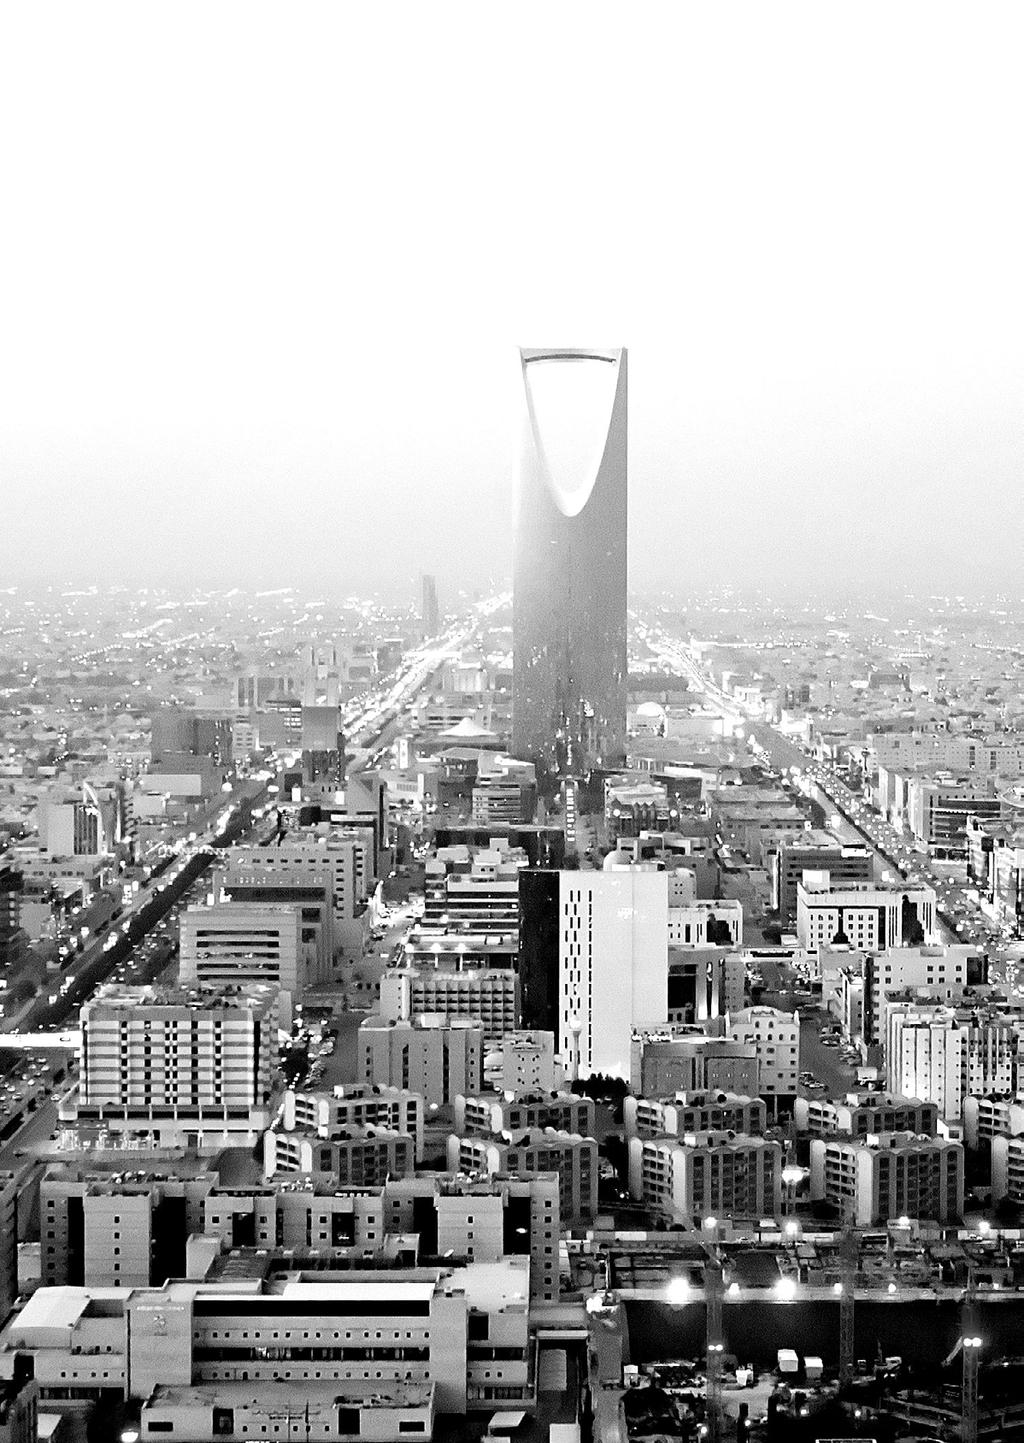 Riyadh 4 The KSA Real Estate Market Year End 218 The KSA Real Estate Market Year End 218 5 Riyadh - Prime Clock While all sectors of the Riyadh market remain in the late downturn stage of their